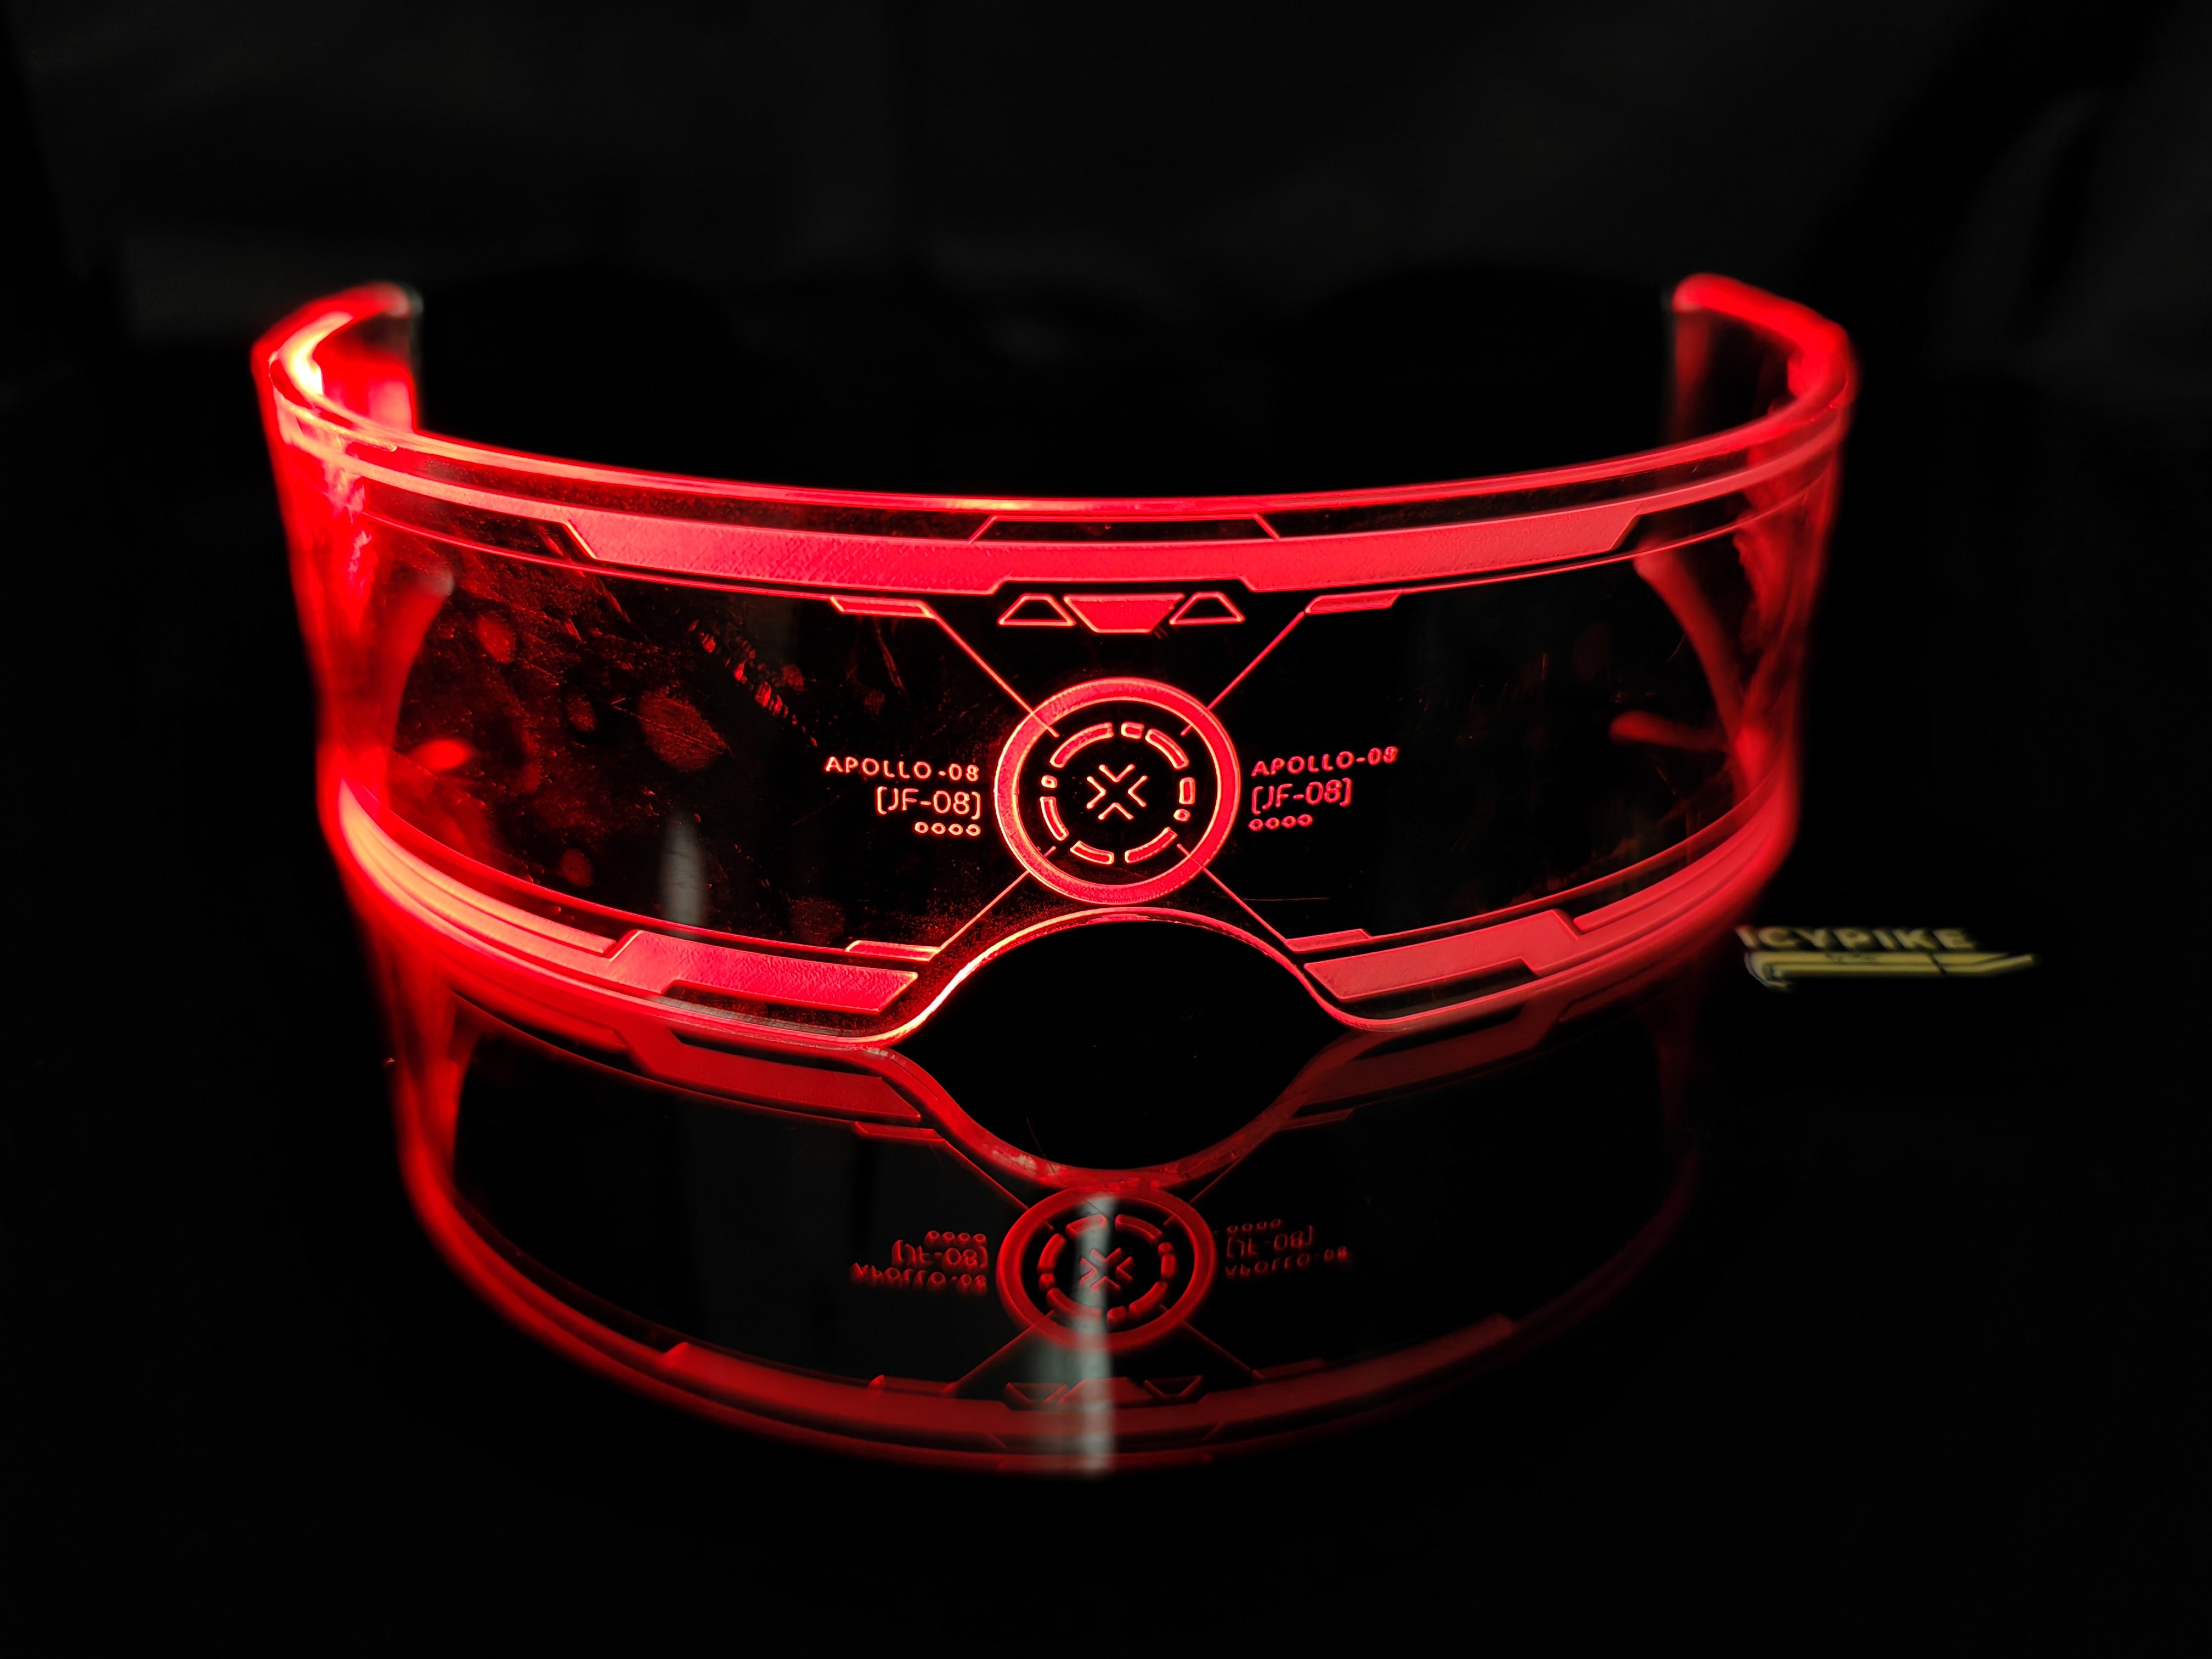 ICYPIKE Red Lens Fashion Sunglasses Red